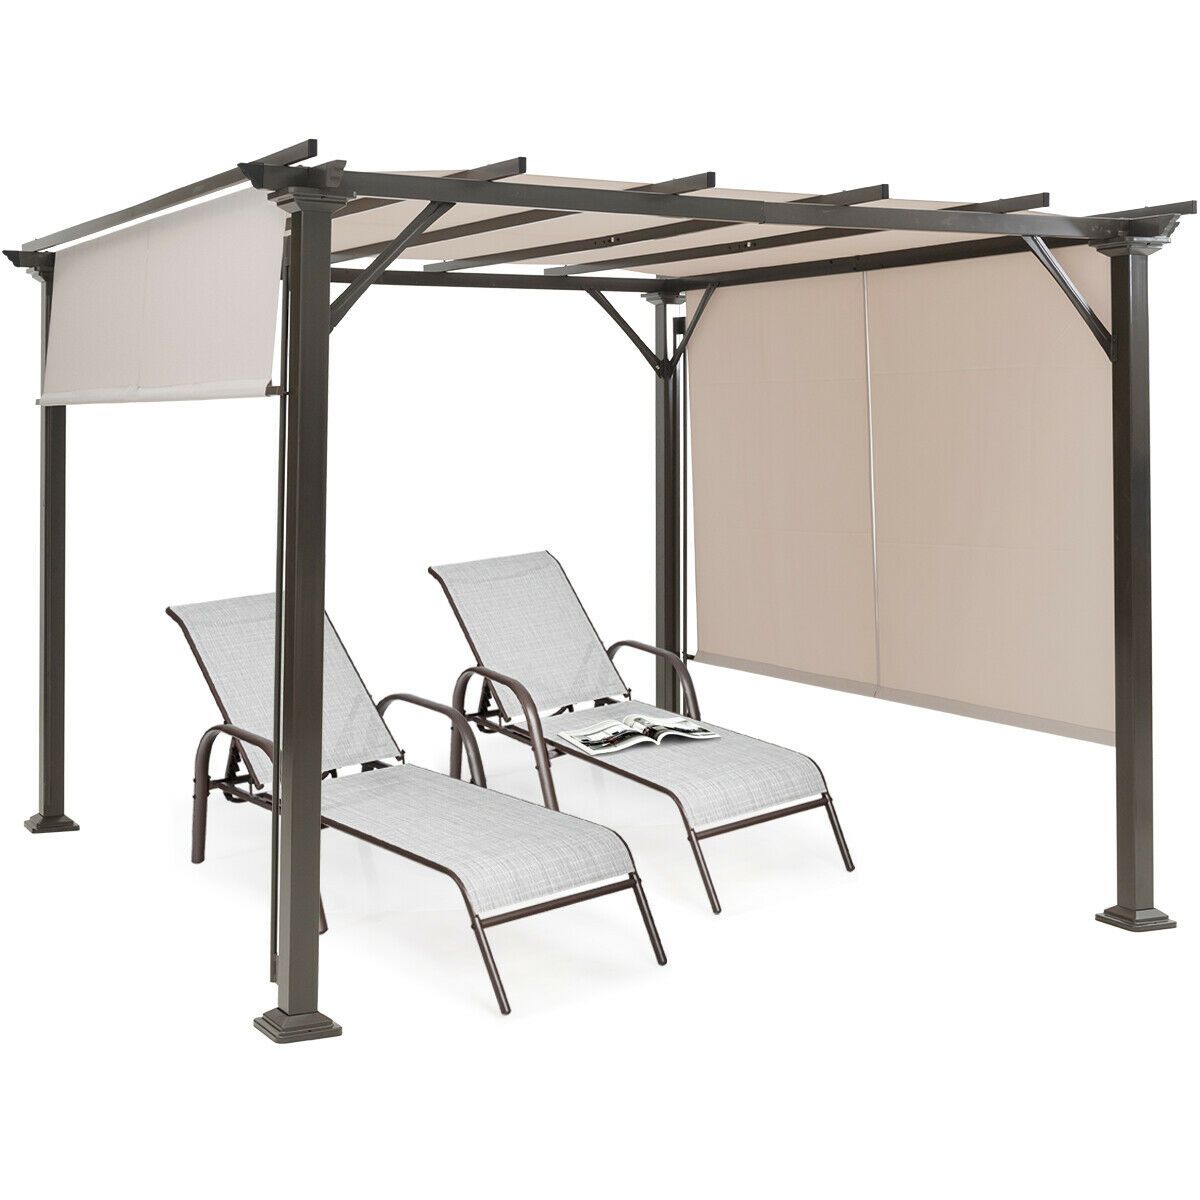 Large Outdoor Backyard Patio Garden Covered Pergola Canopy Kit 10' x 10' - Westfield Retailers